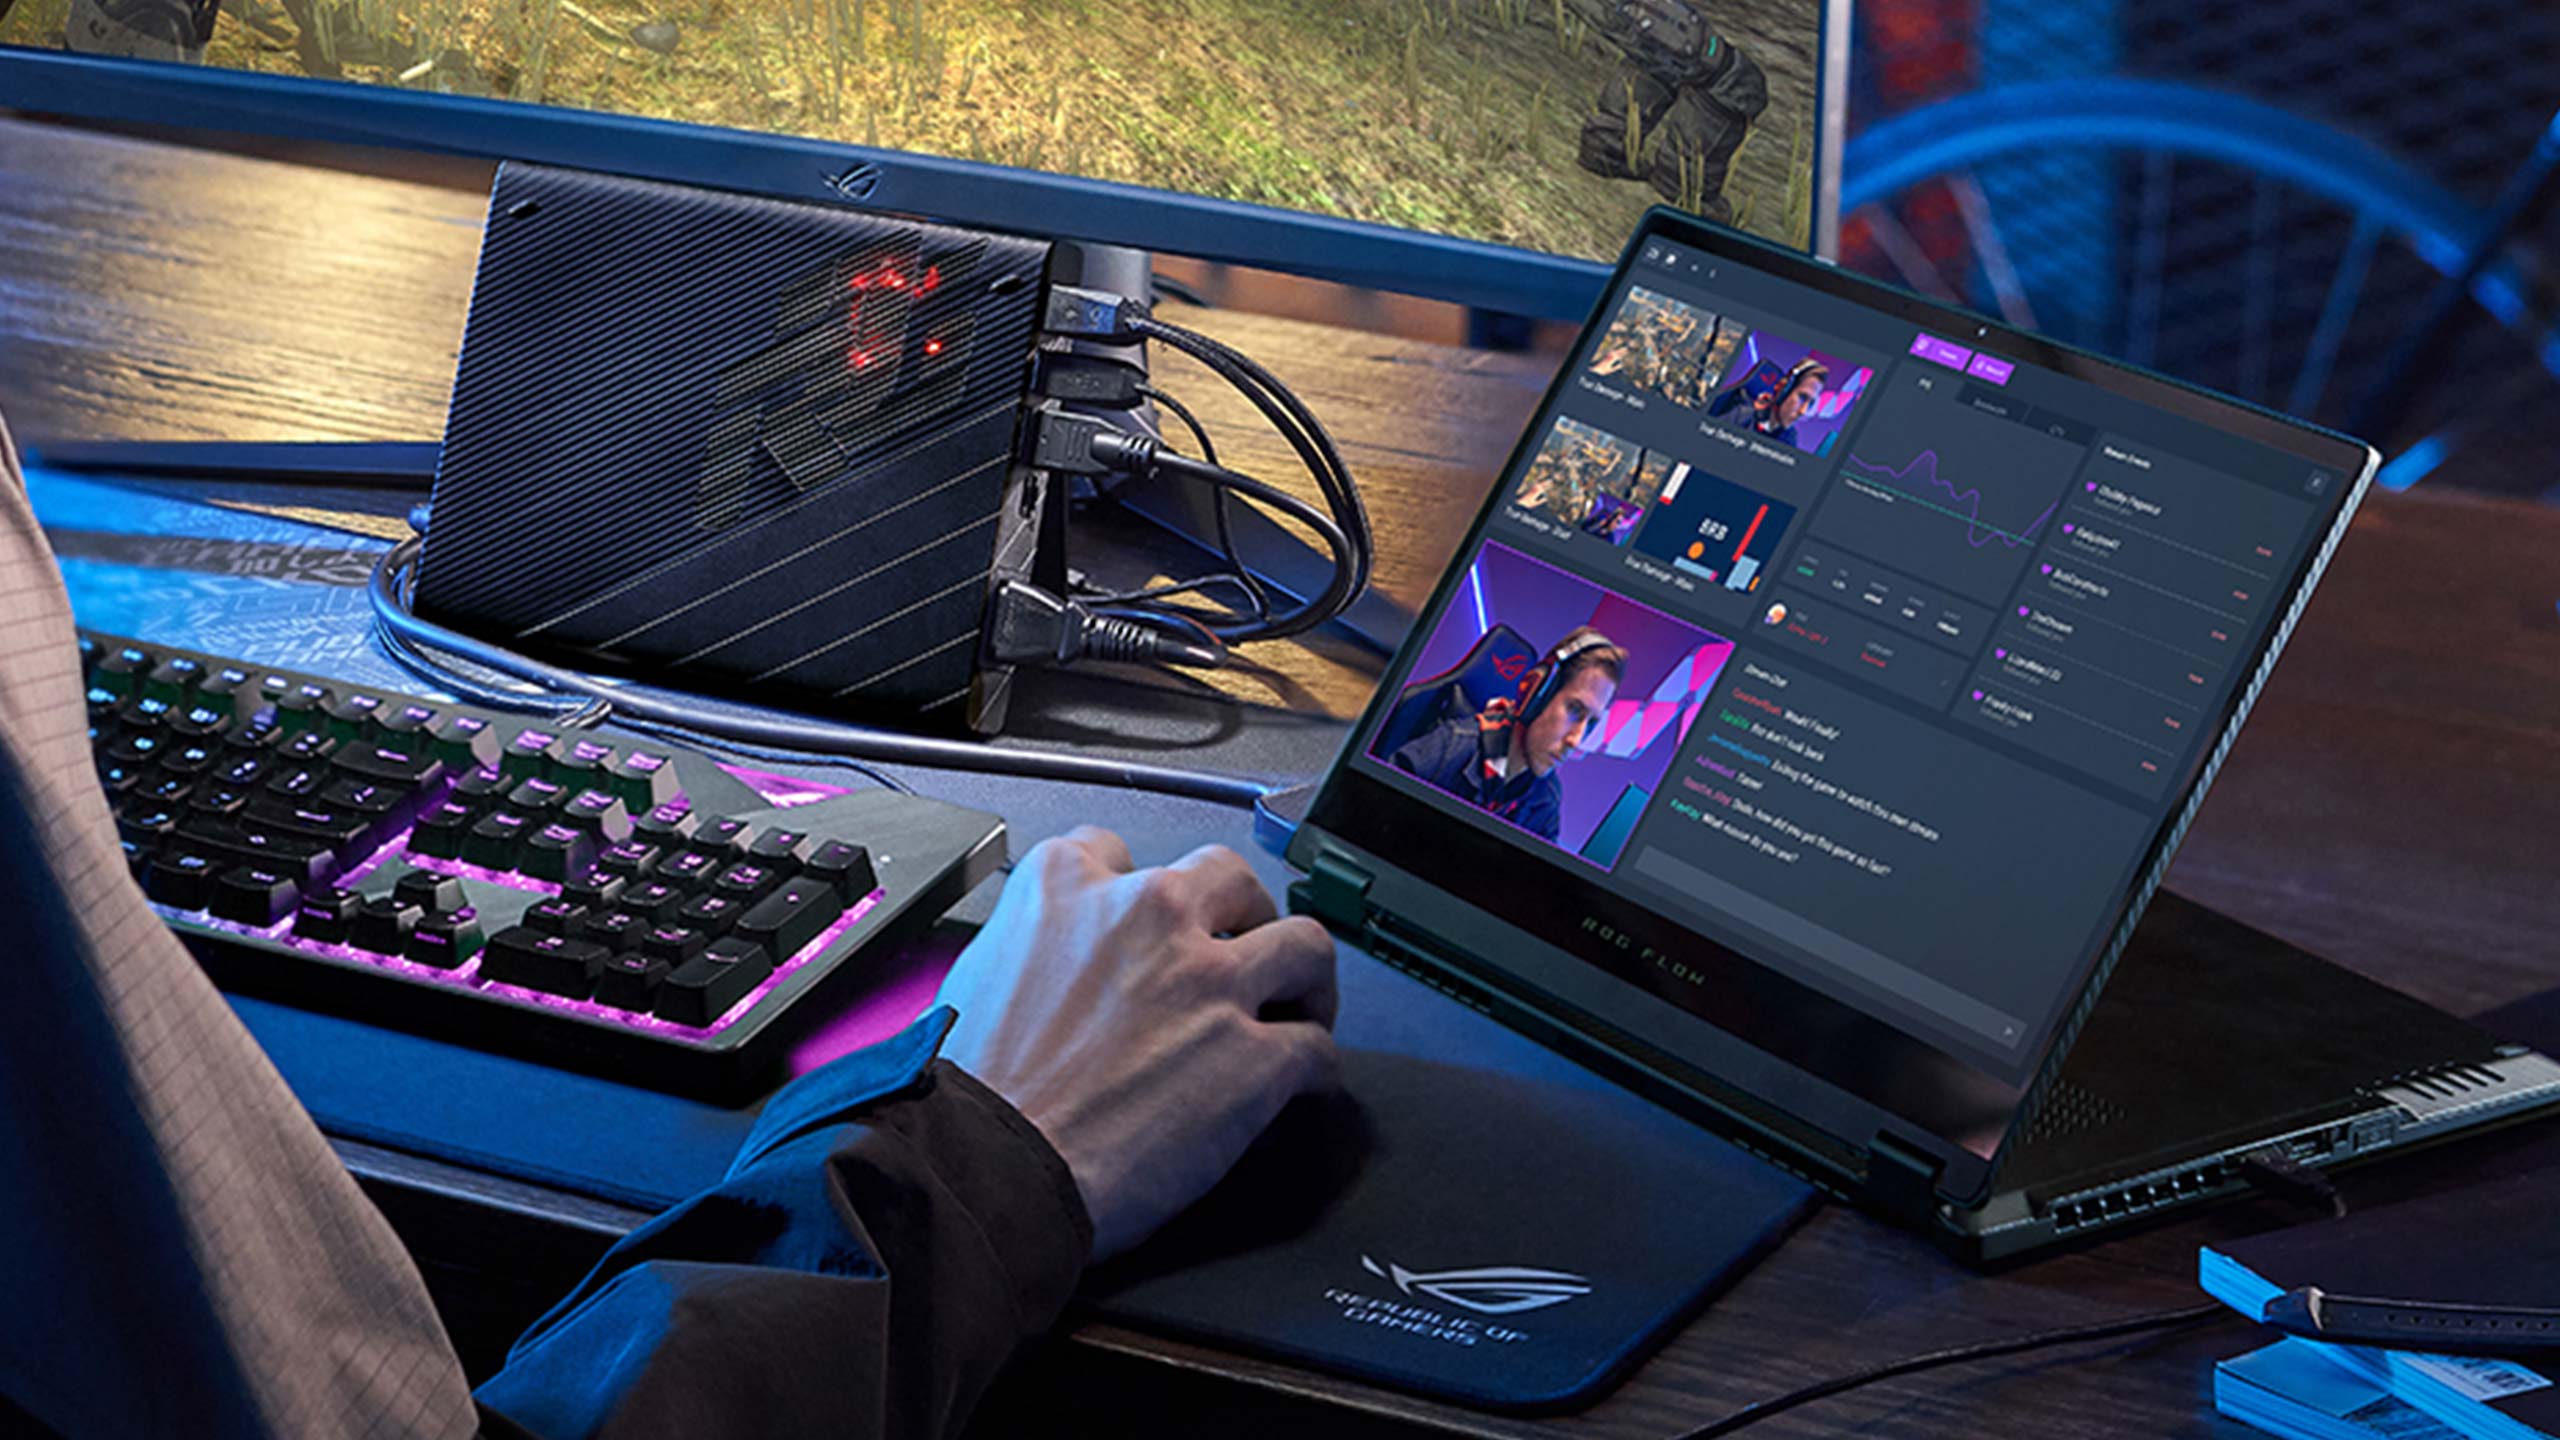 The best 2in1 laptop of CES 2021 could be a gaming revelation Tom's